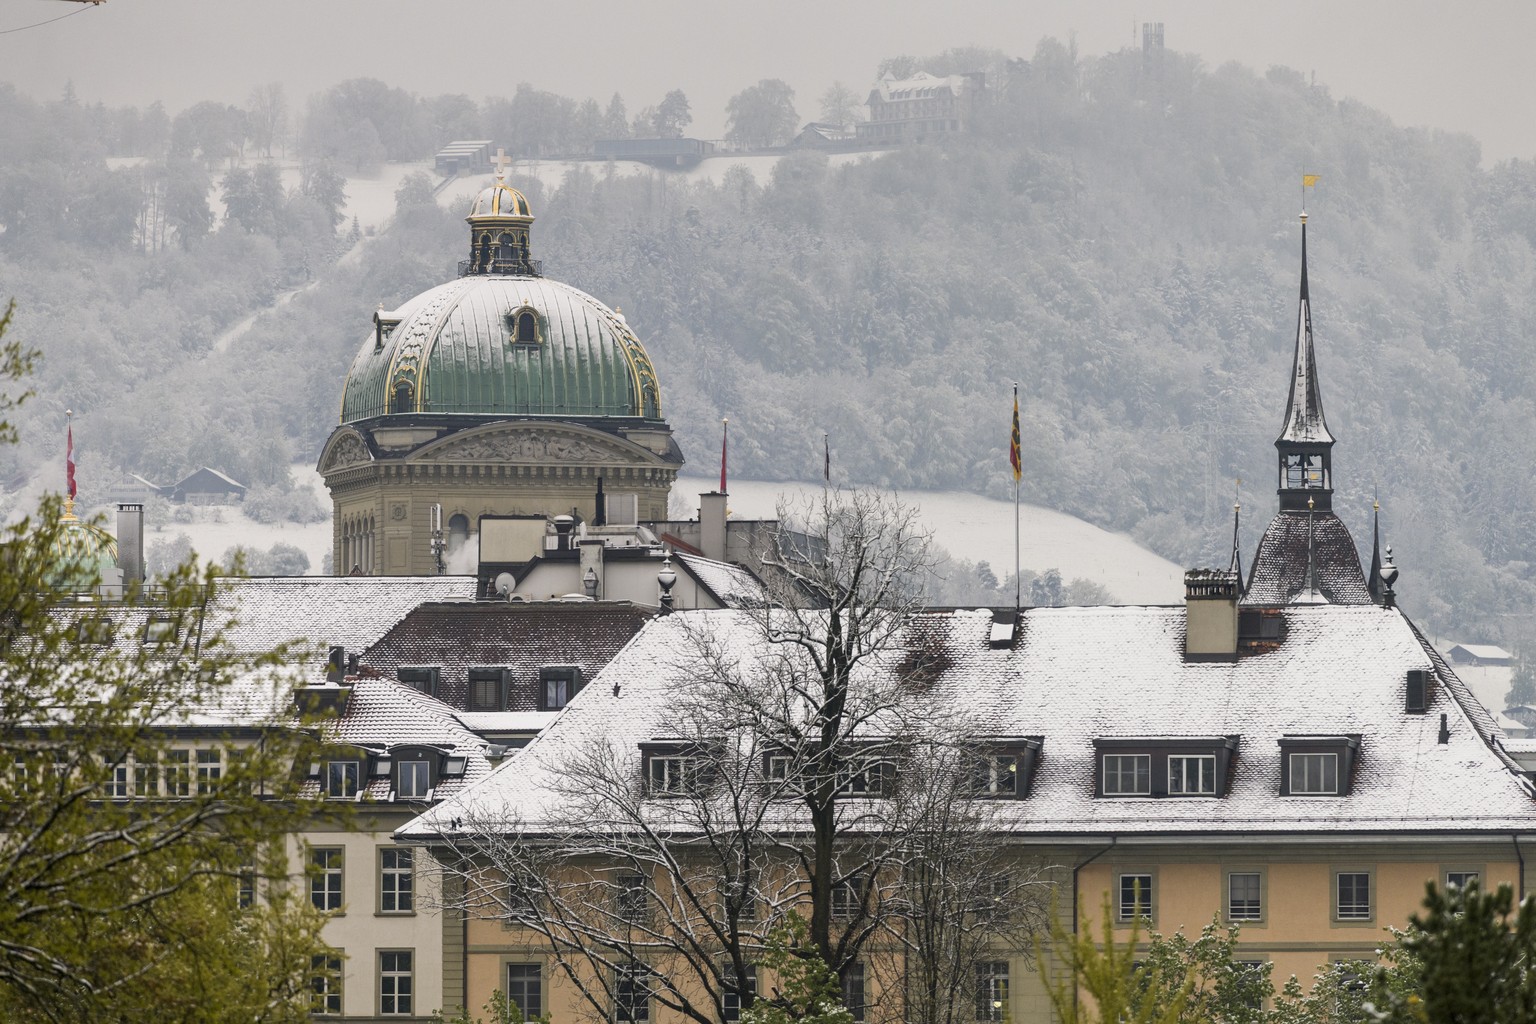 The city of Bern with the Federal Palace, the parliament building, under a blanket of snow, Sunday, May 5, 2019. (KEYSTONE/Alessandro della Valle)